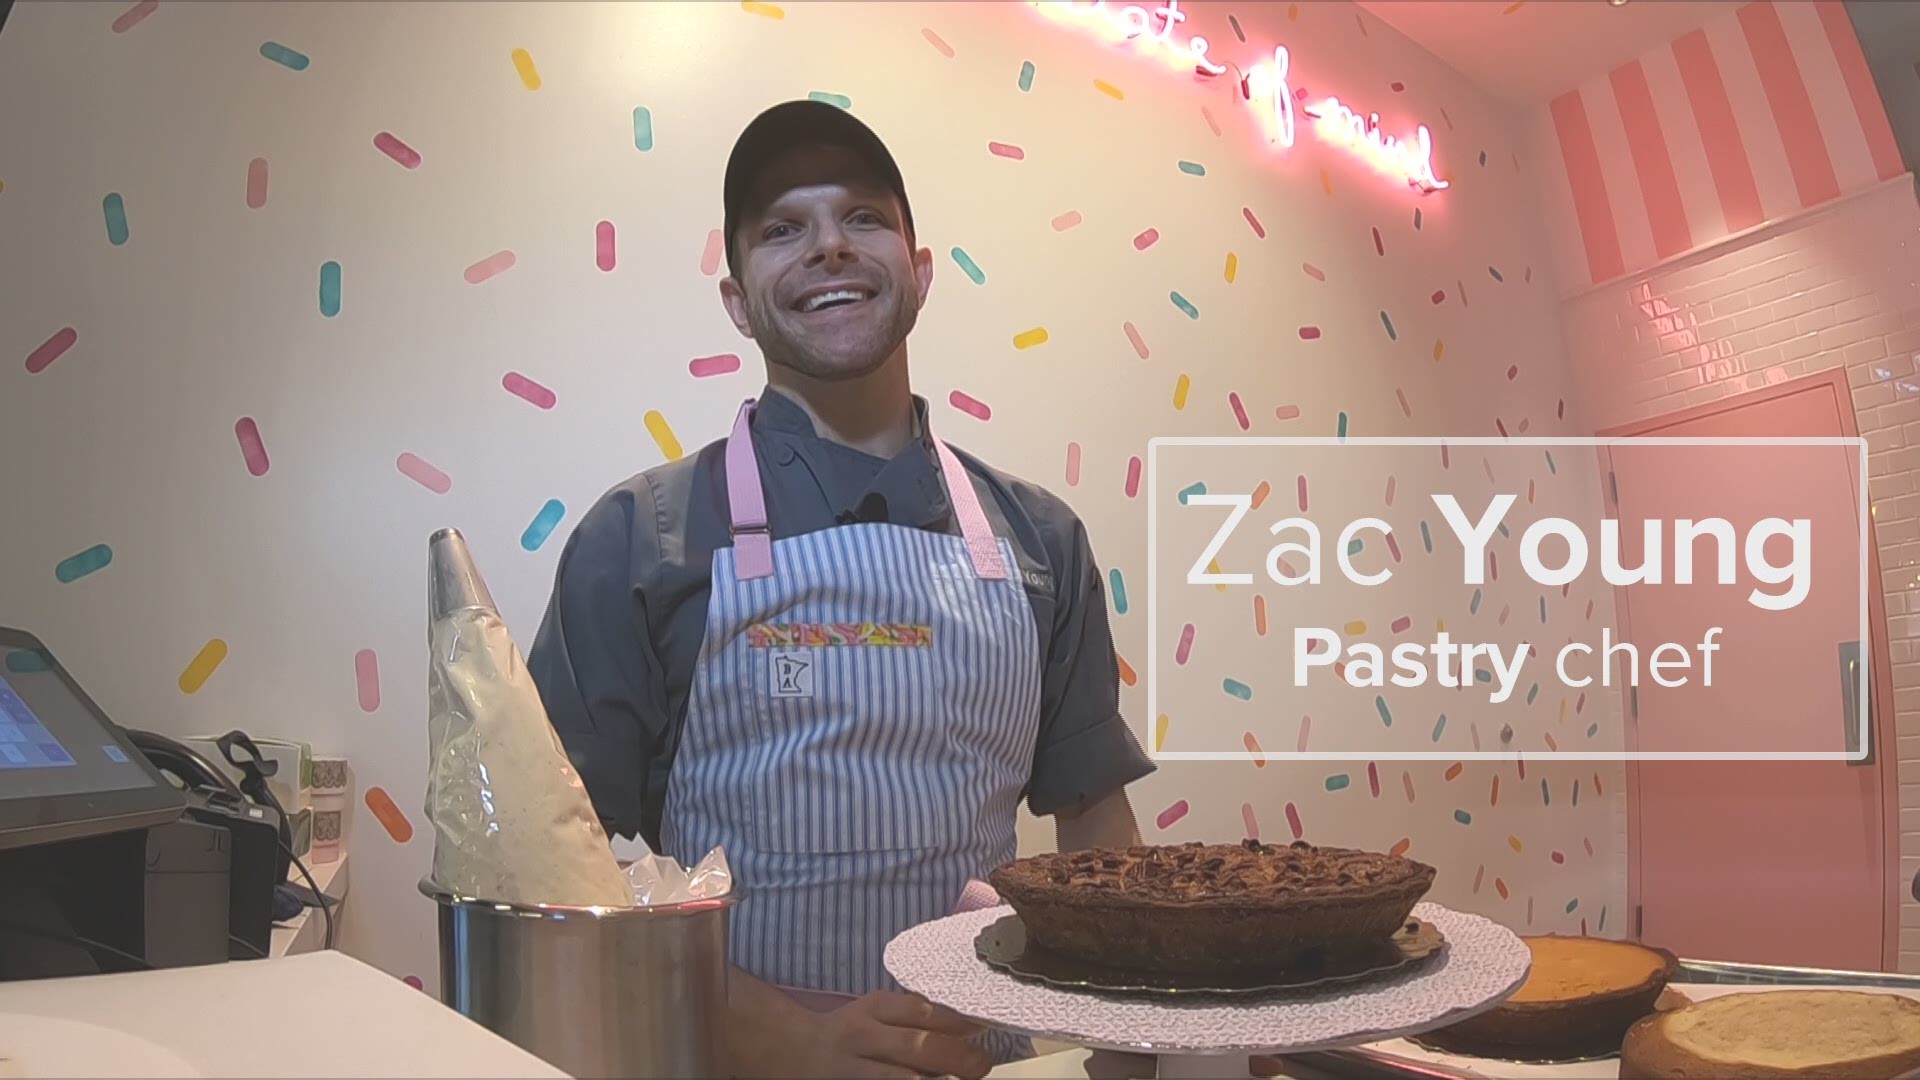 Pastry Chef Zac Young brings his viral sensation "The Piecaken" -- a holiday treat featuring pumpkin and pecan pie, all inside a cake, topped with apple pie filling -- to the masses at Rosedale's Revolution Hall. But don't forget to pick up some delicious